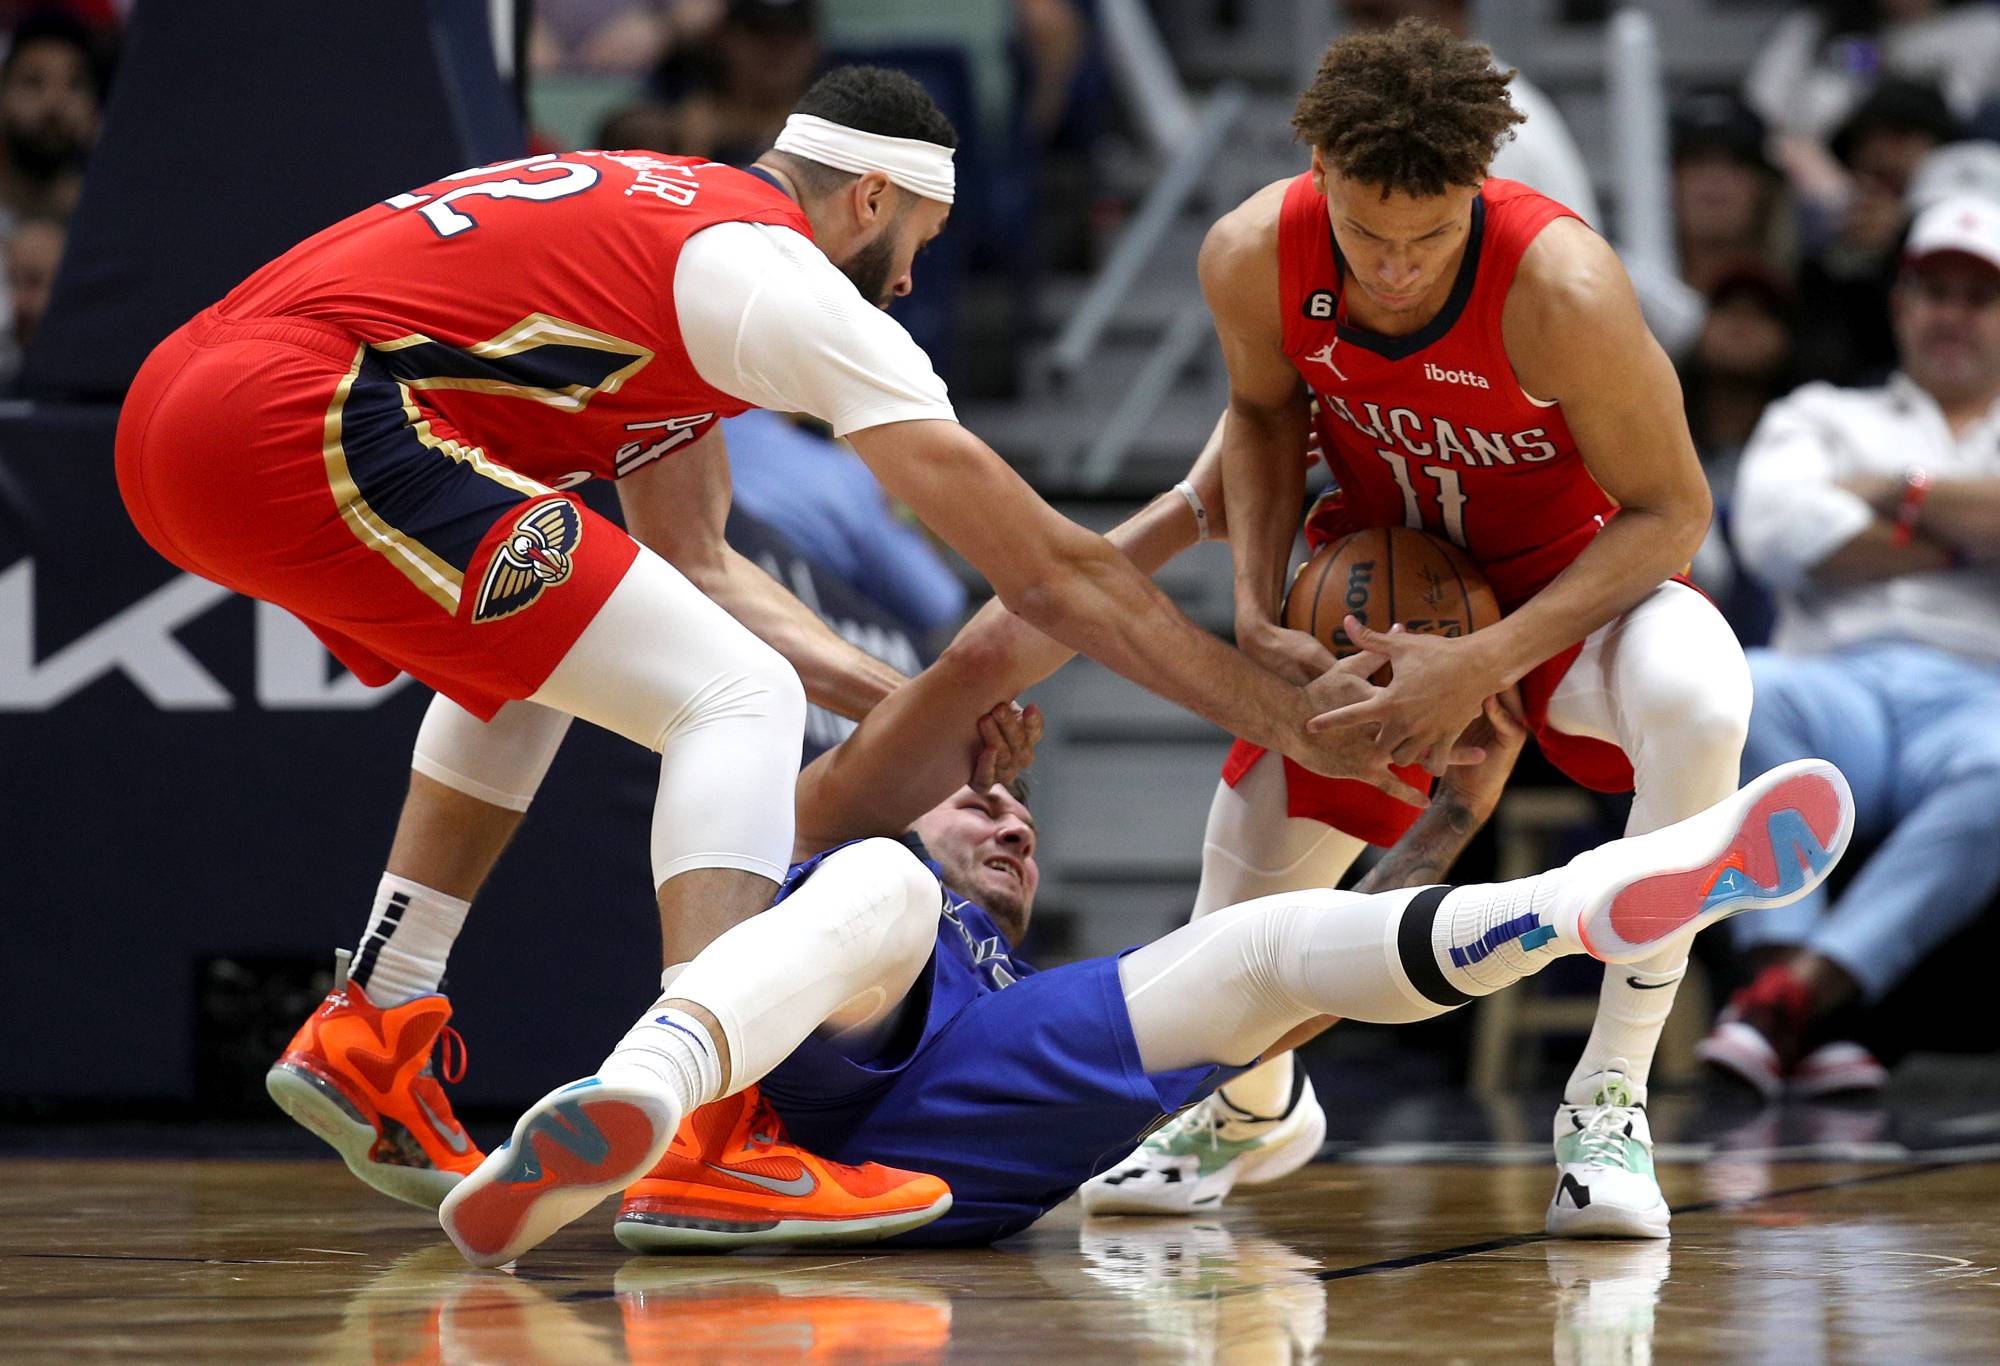 NEW ORLEANS, LOUISIANA - OCTOBER 25: Dyson Daniels #11 and Larry Nance Jr. #22 of the New Orleans Pelicans steals the ball from Luka Doncic #77 of the Dallas Mavericks during the first quarter at Smoothie King Center on October 25, 2022 in New Orleans, Louisiana. NOTE TO USER: User expressly acknowledges and agrees that, by downloading and or using this photograph, User is consenting to the terms and conditions of the Getty Images License Agreement. (Photo by Sean Gardner/Getty Images)